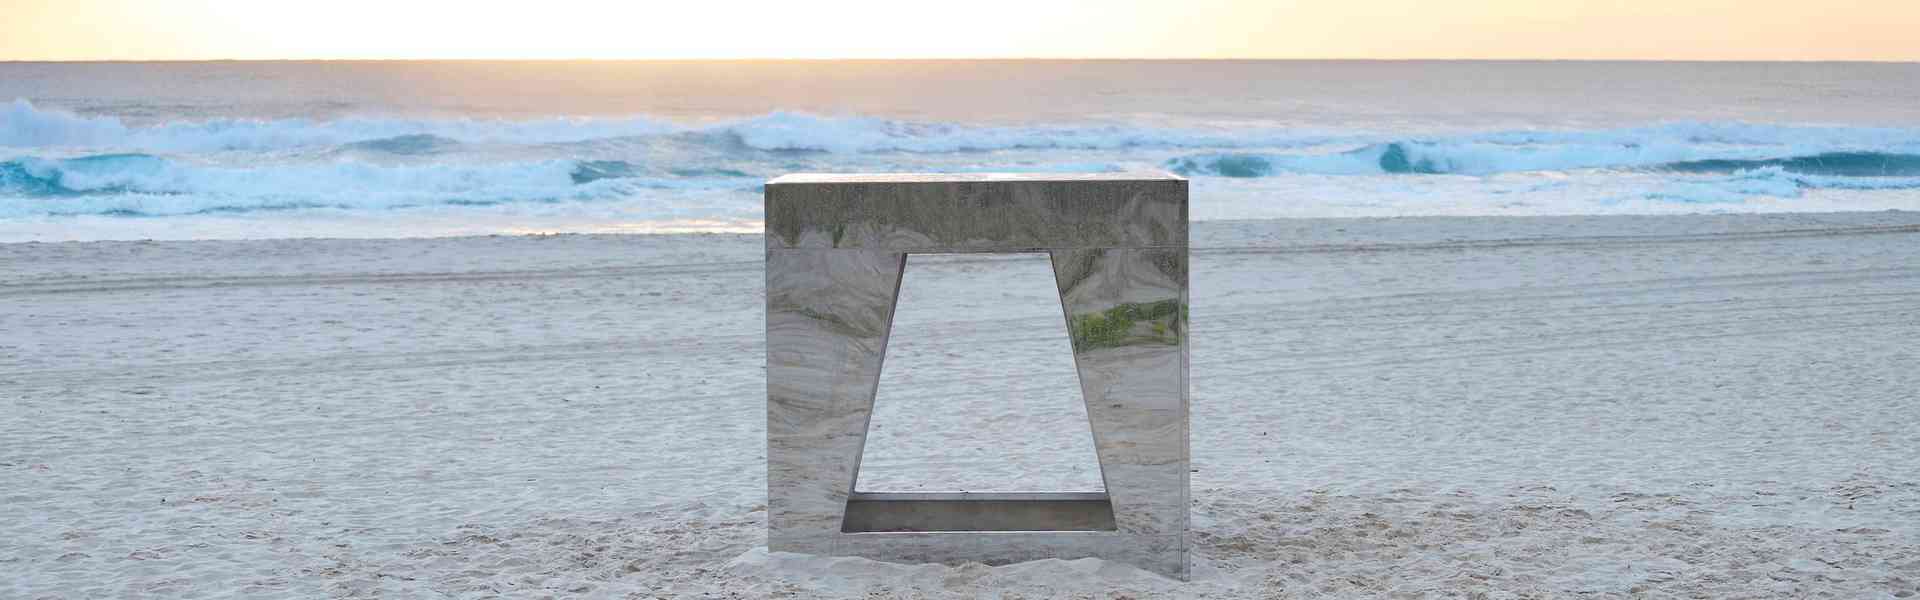 'You/Me/Sky/Sea' by Jasmine Mansbridge at Swell Sculpture Festival 2020